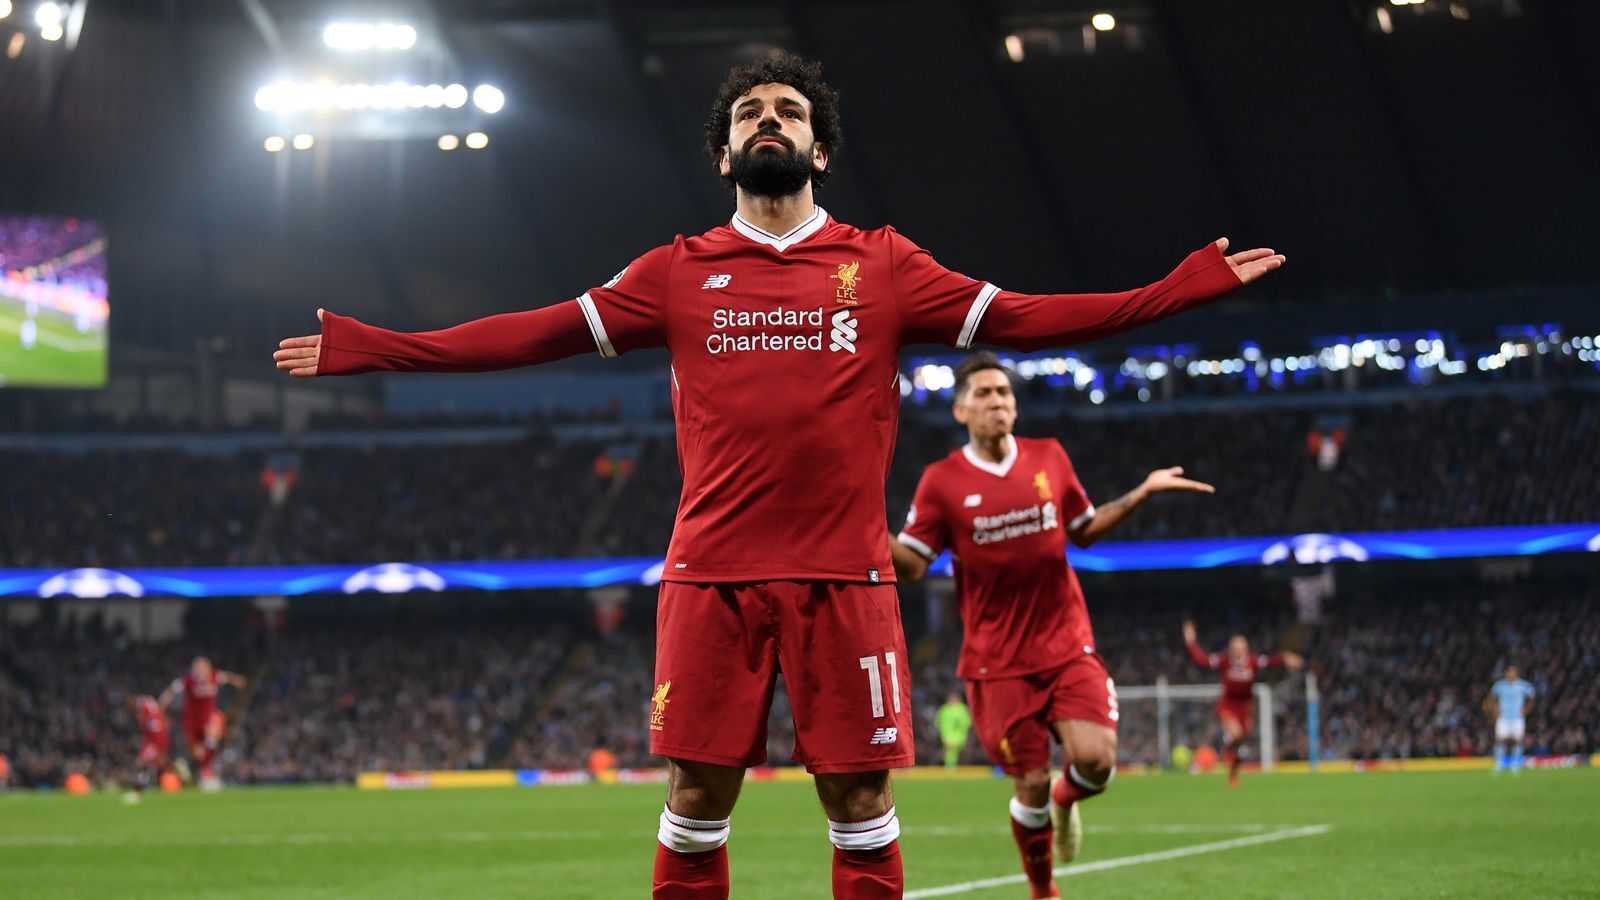 Salah Wishes to Remain at Liverpool after Their Recent Success